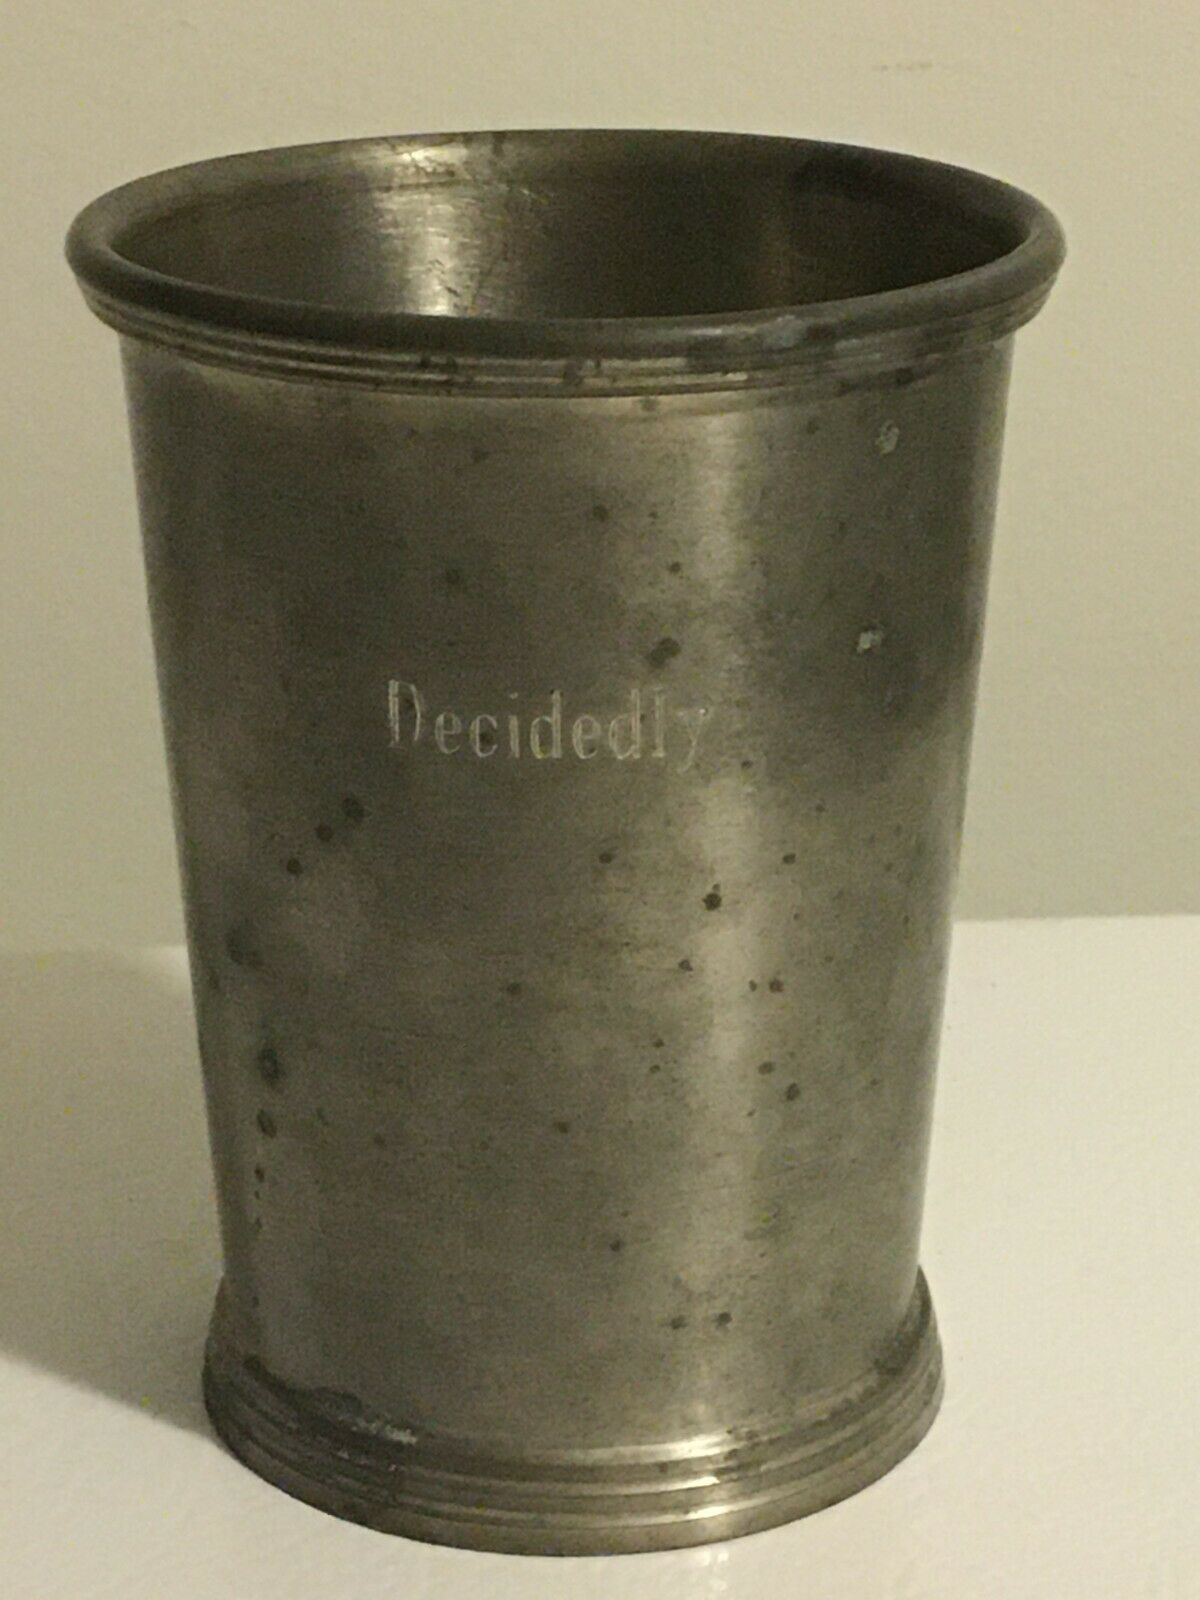 Vtg Personalized Engraved 1962 Decidedly Kentucky Derby Winner Mint Julep Cup